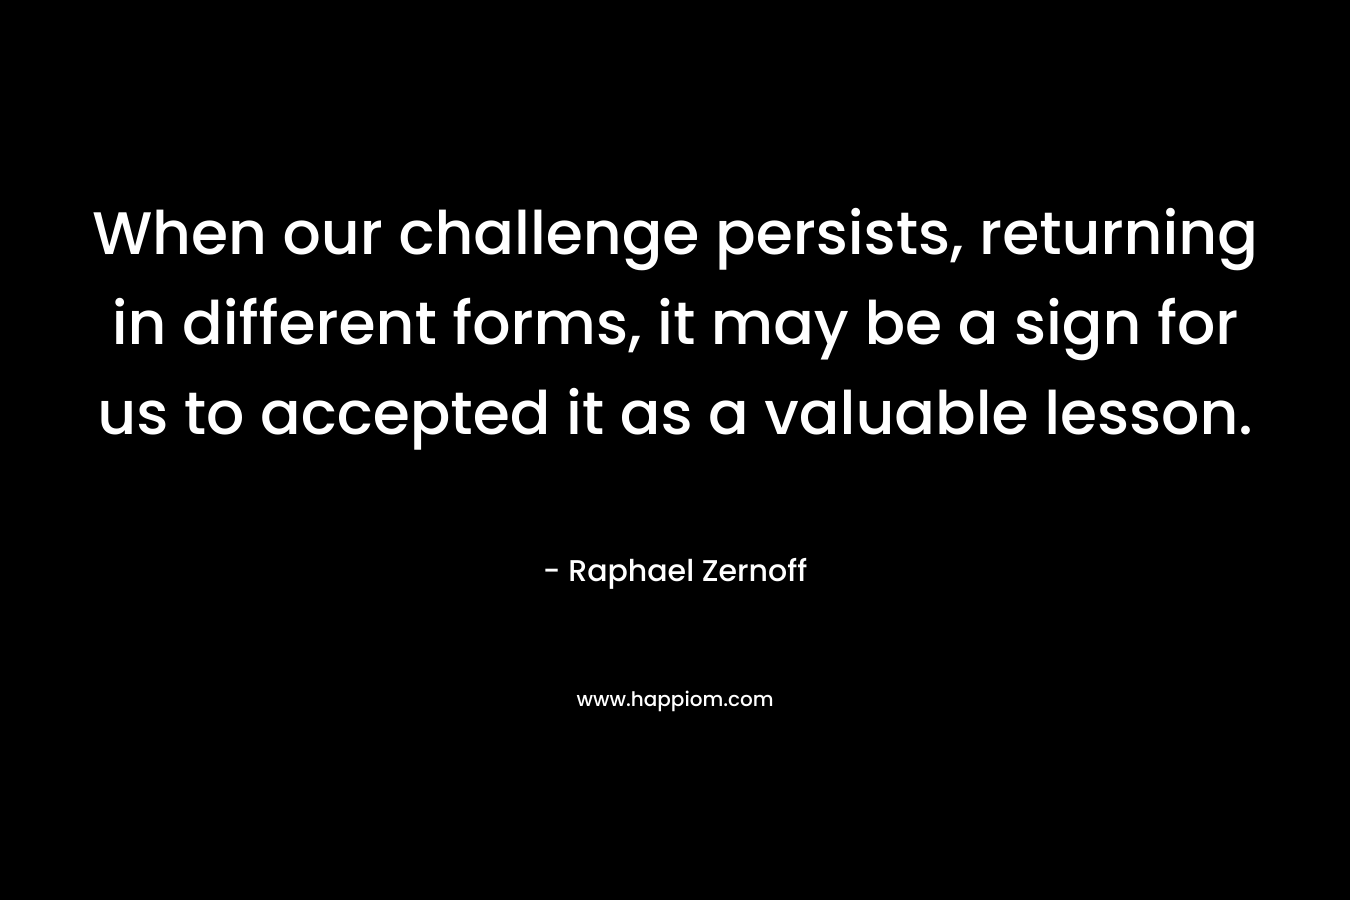 When our challenge persists, returning in different forms, it may be a sign for us to accepted it as a valuable lesson.